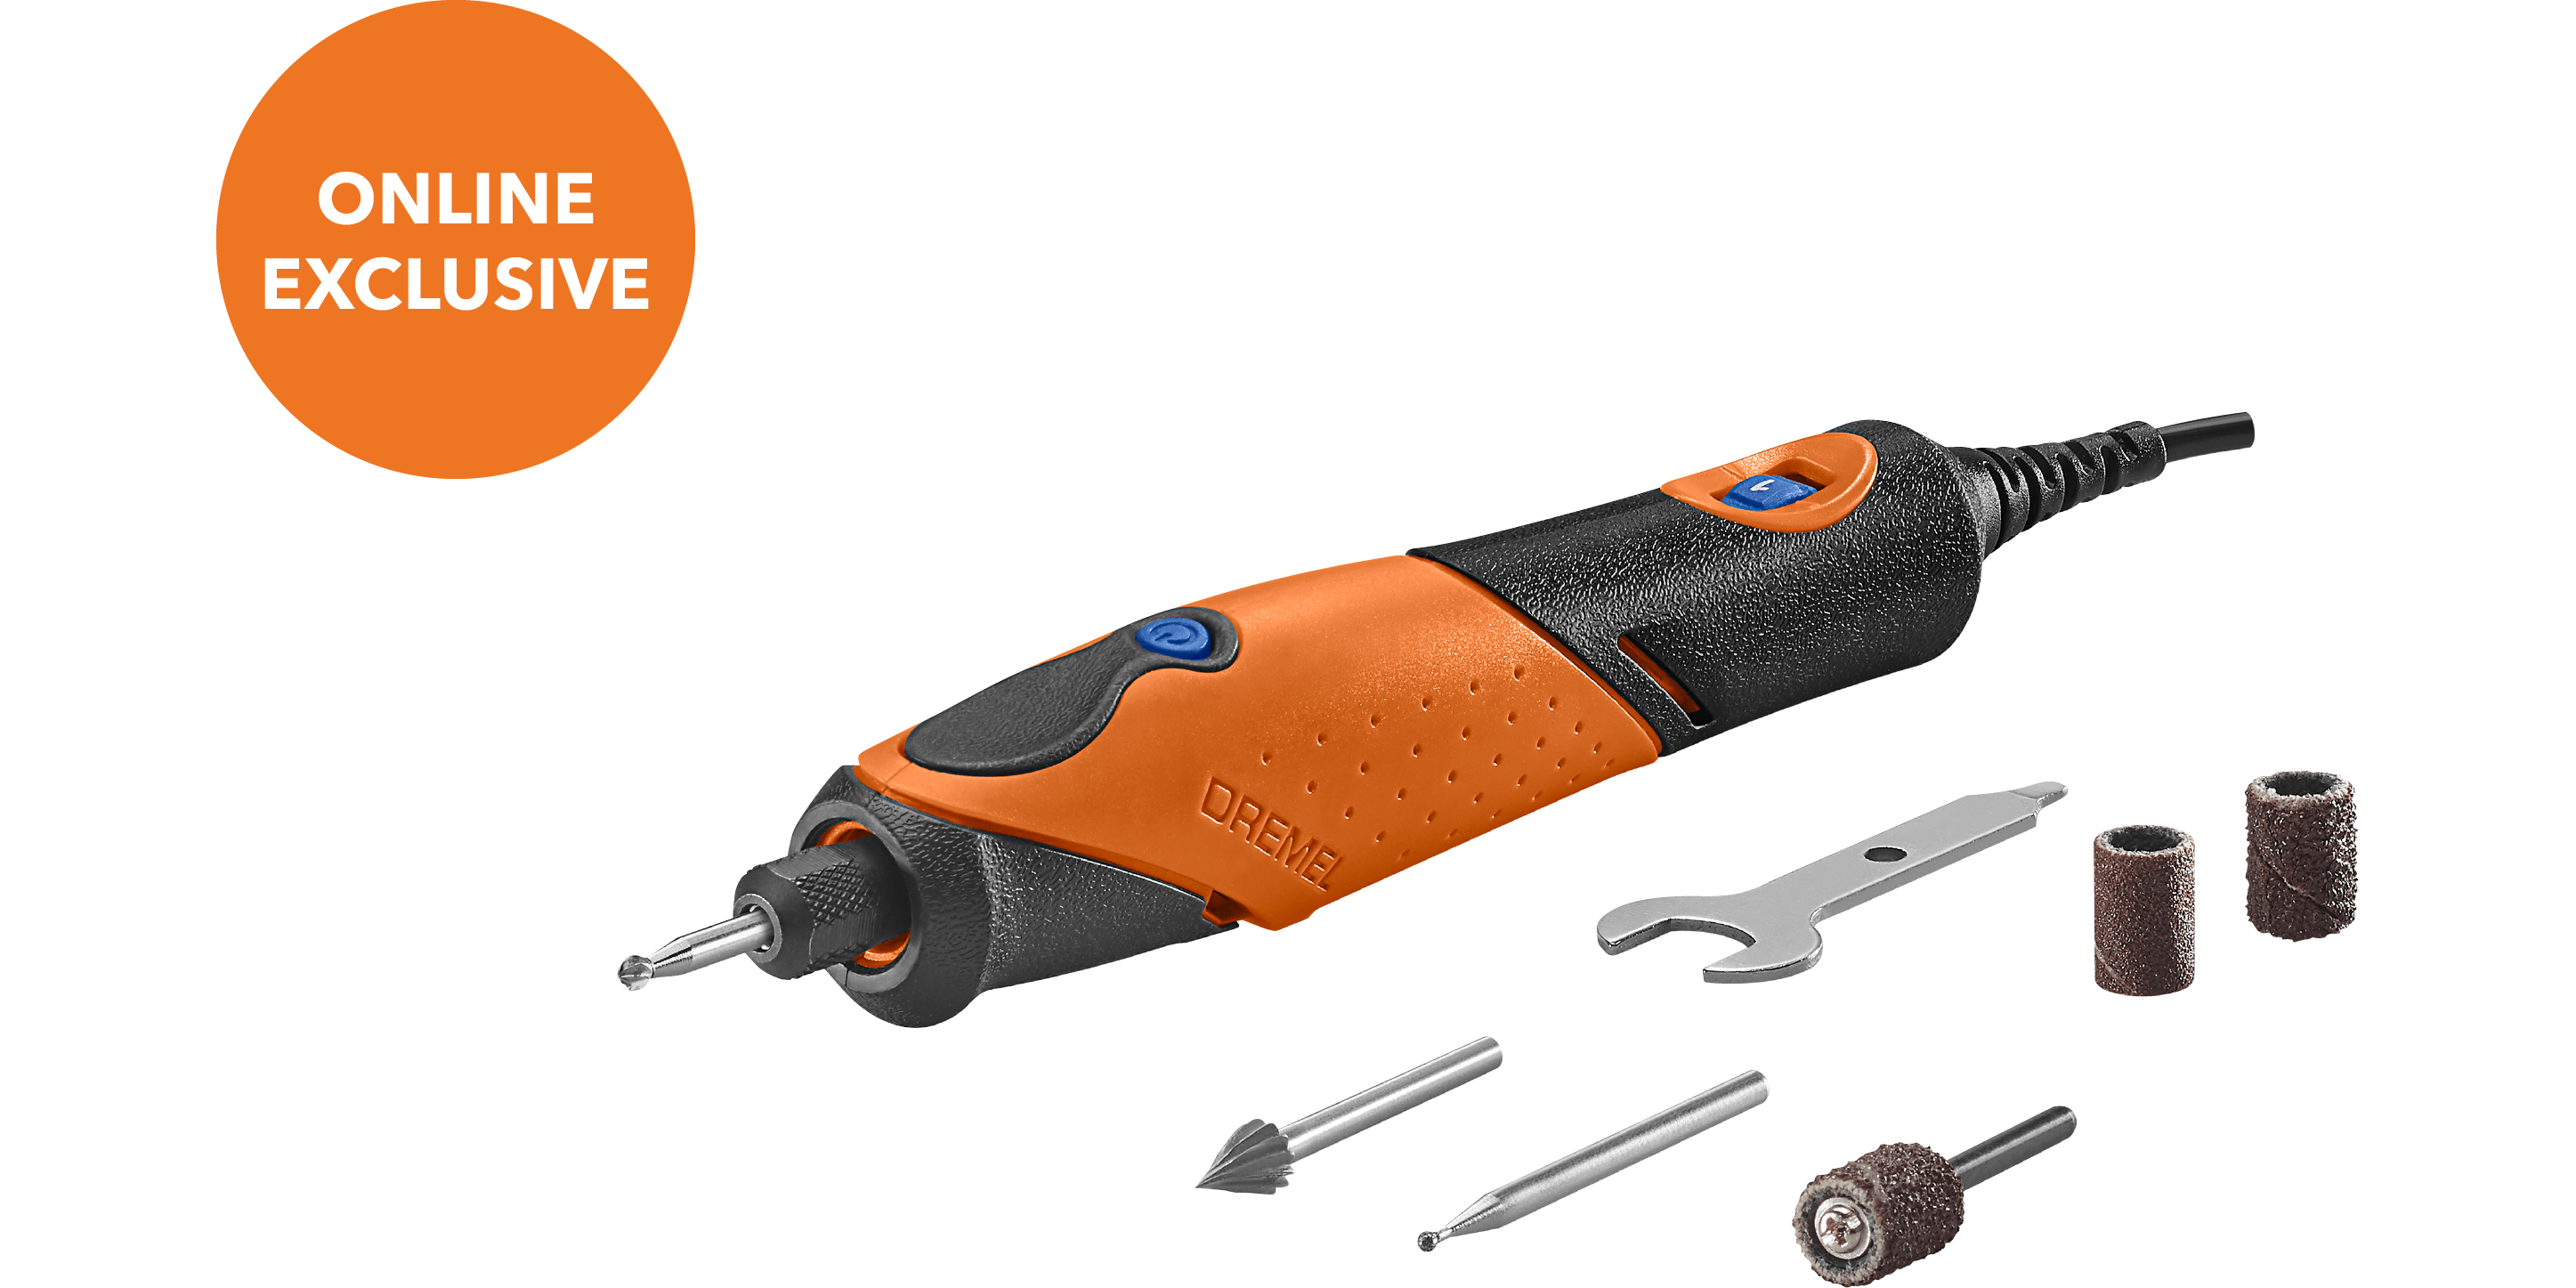 MSCHF Launches the New Gobstomper Dremel® Edition Featuring a DREMEL Rotary  Tool